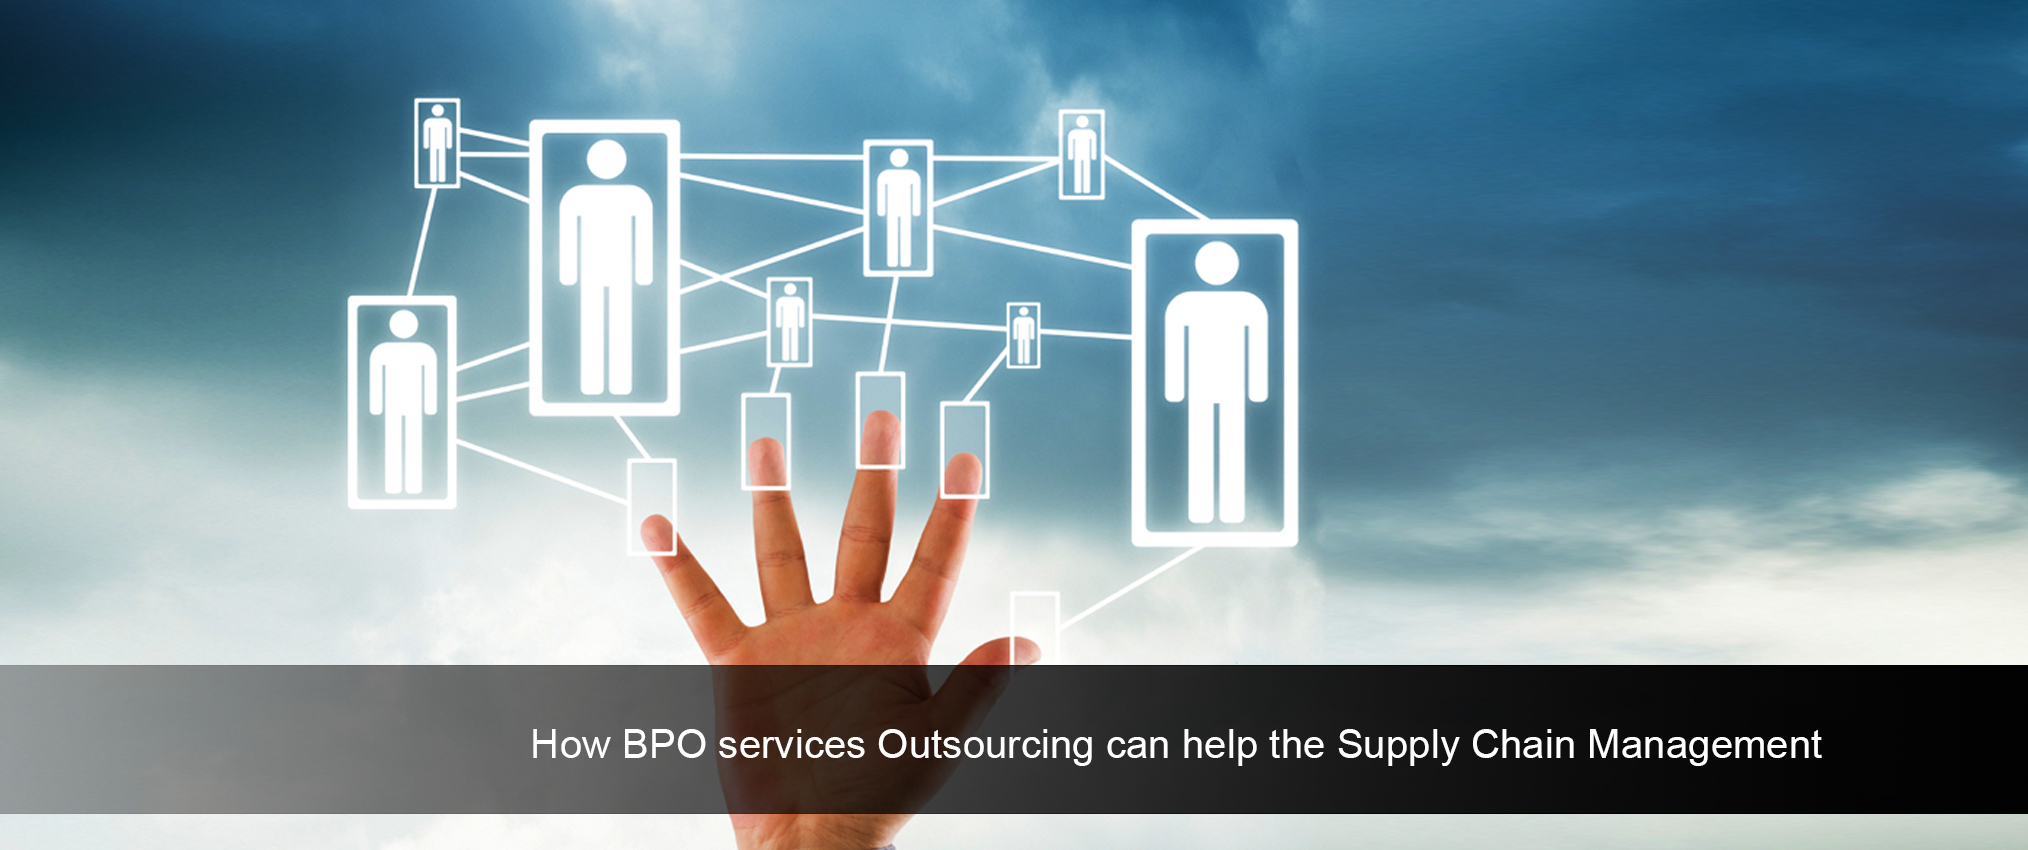 How BPO services Outsourcing can help the Supply Chain Management